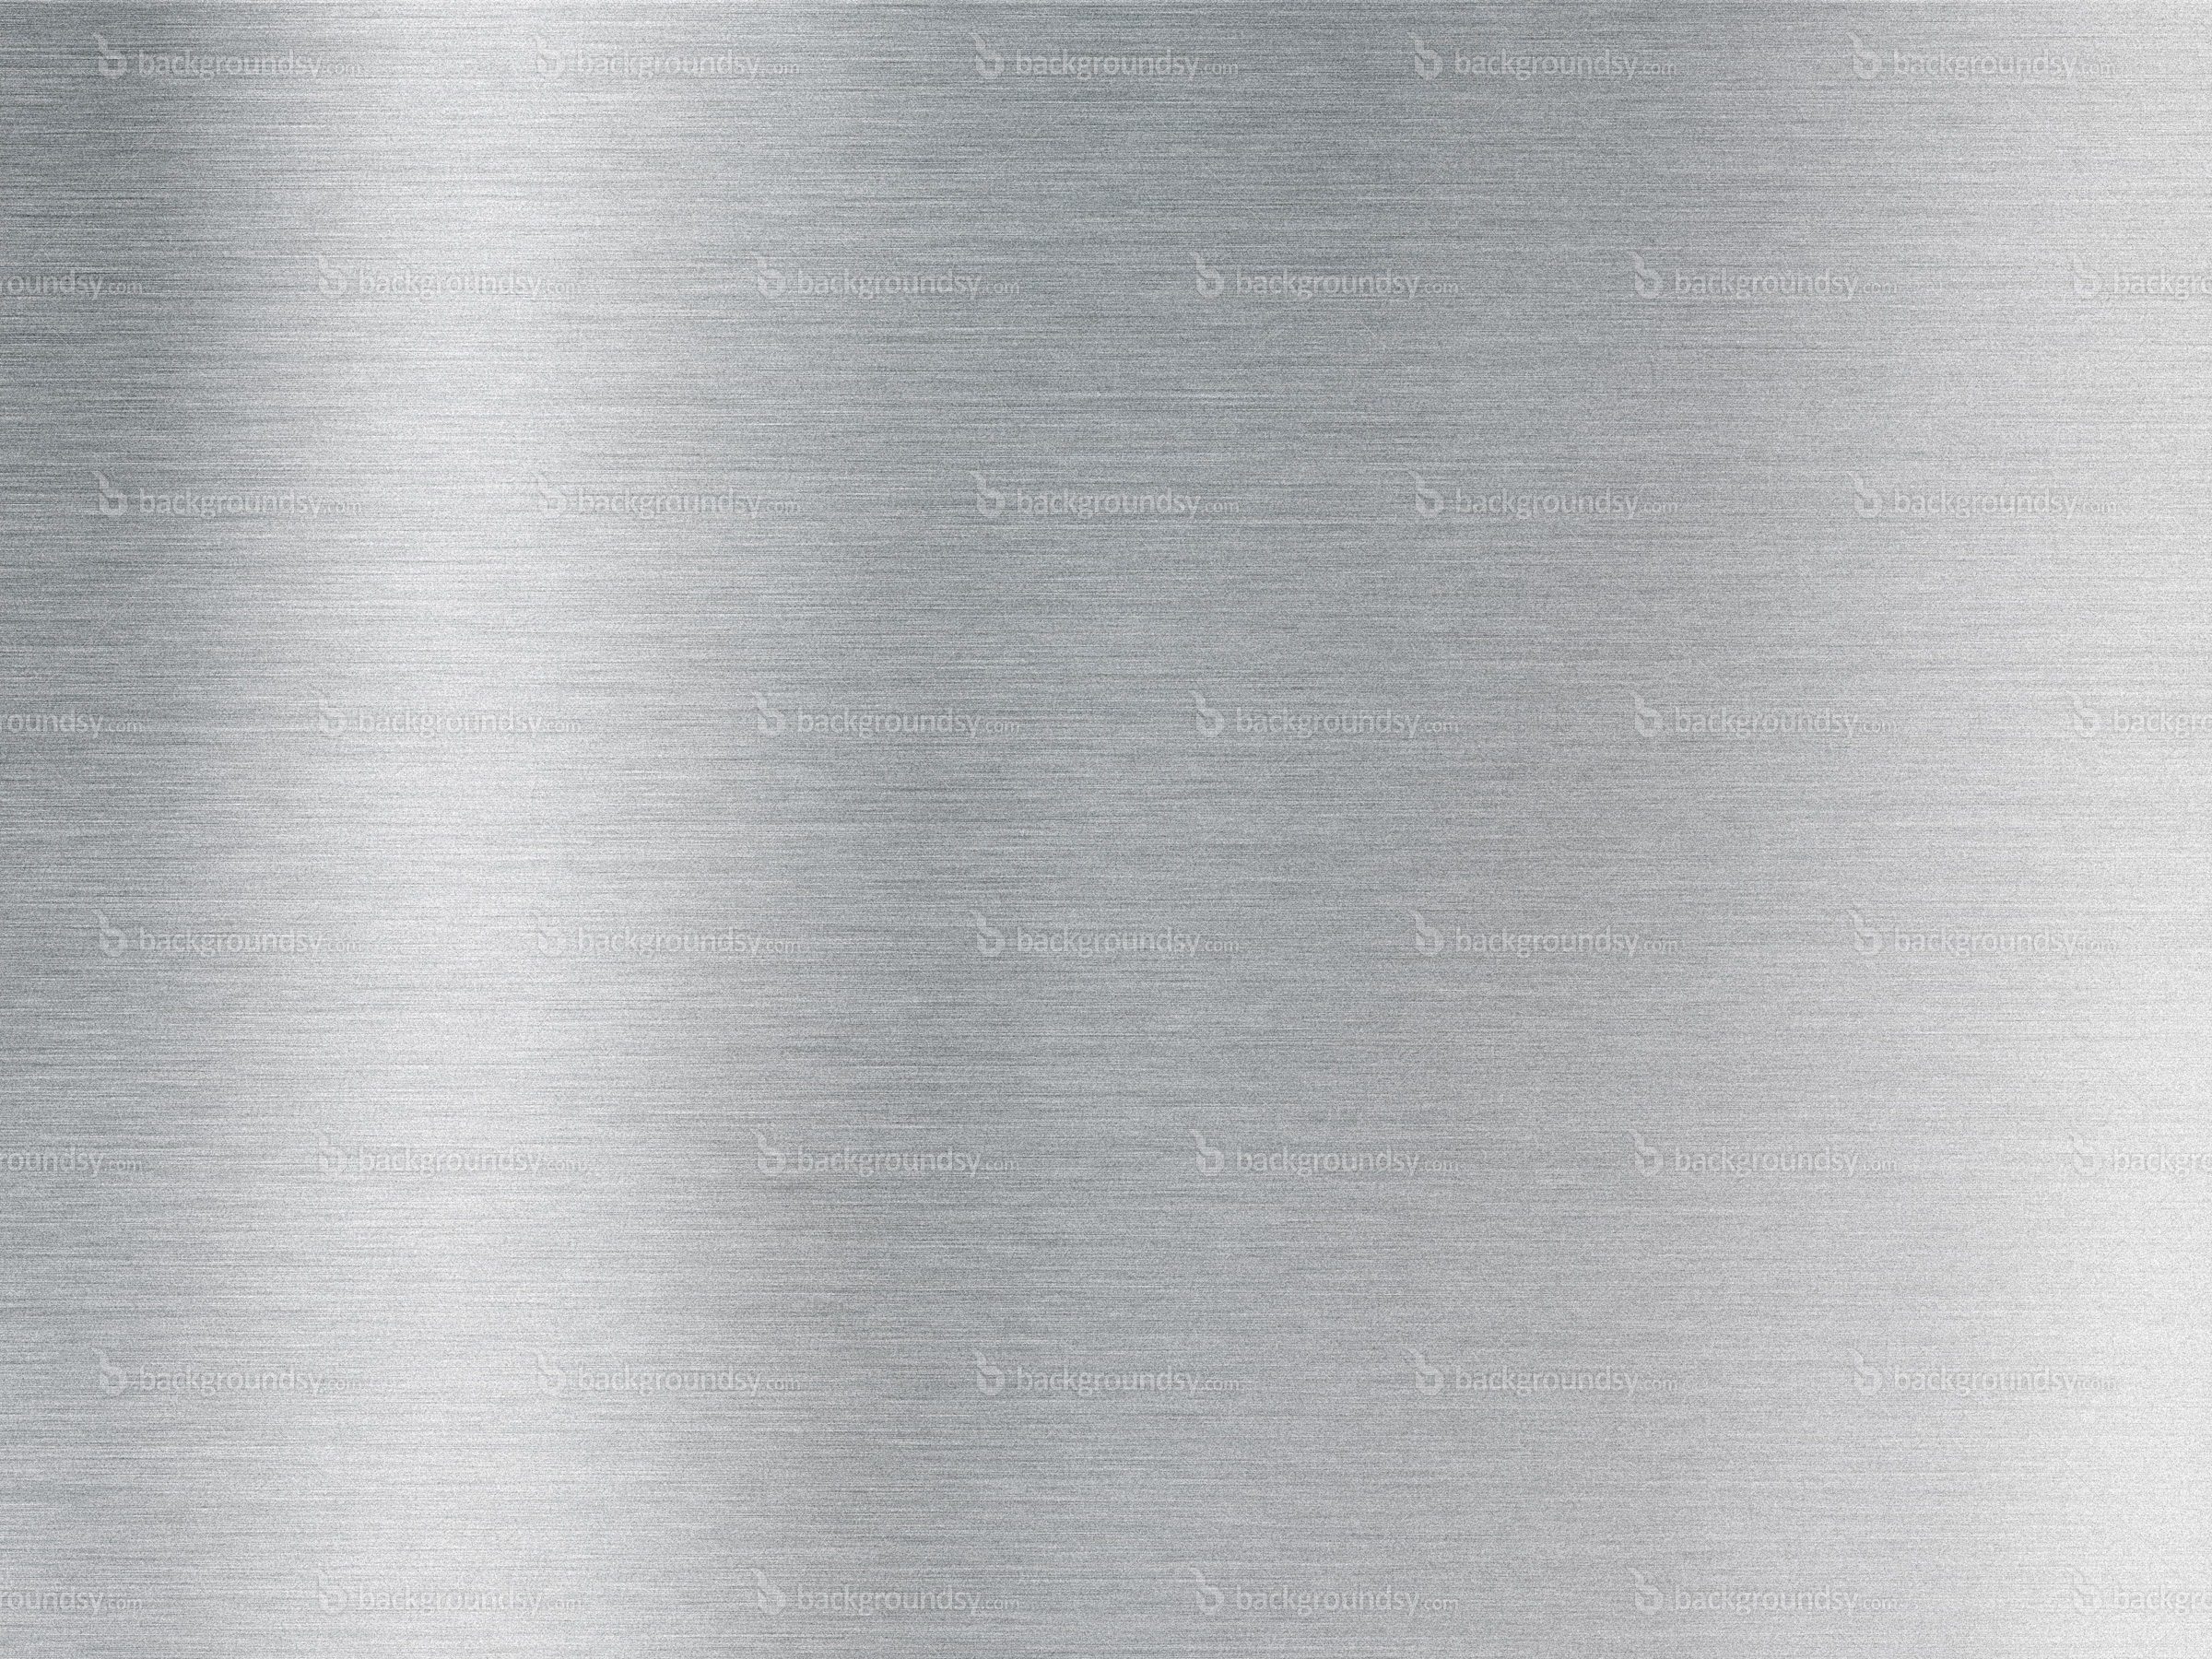 Brushed Silver Metallic Background Top Pictures Gallery Online